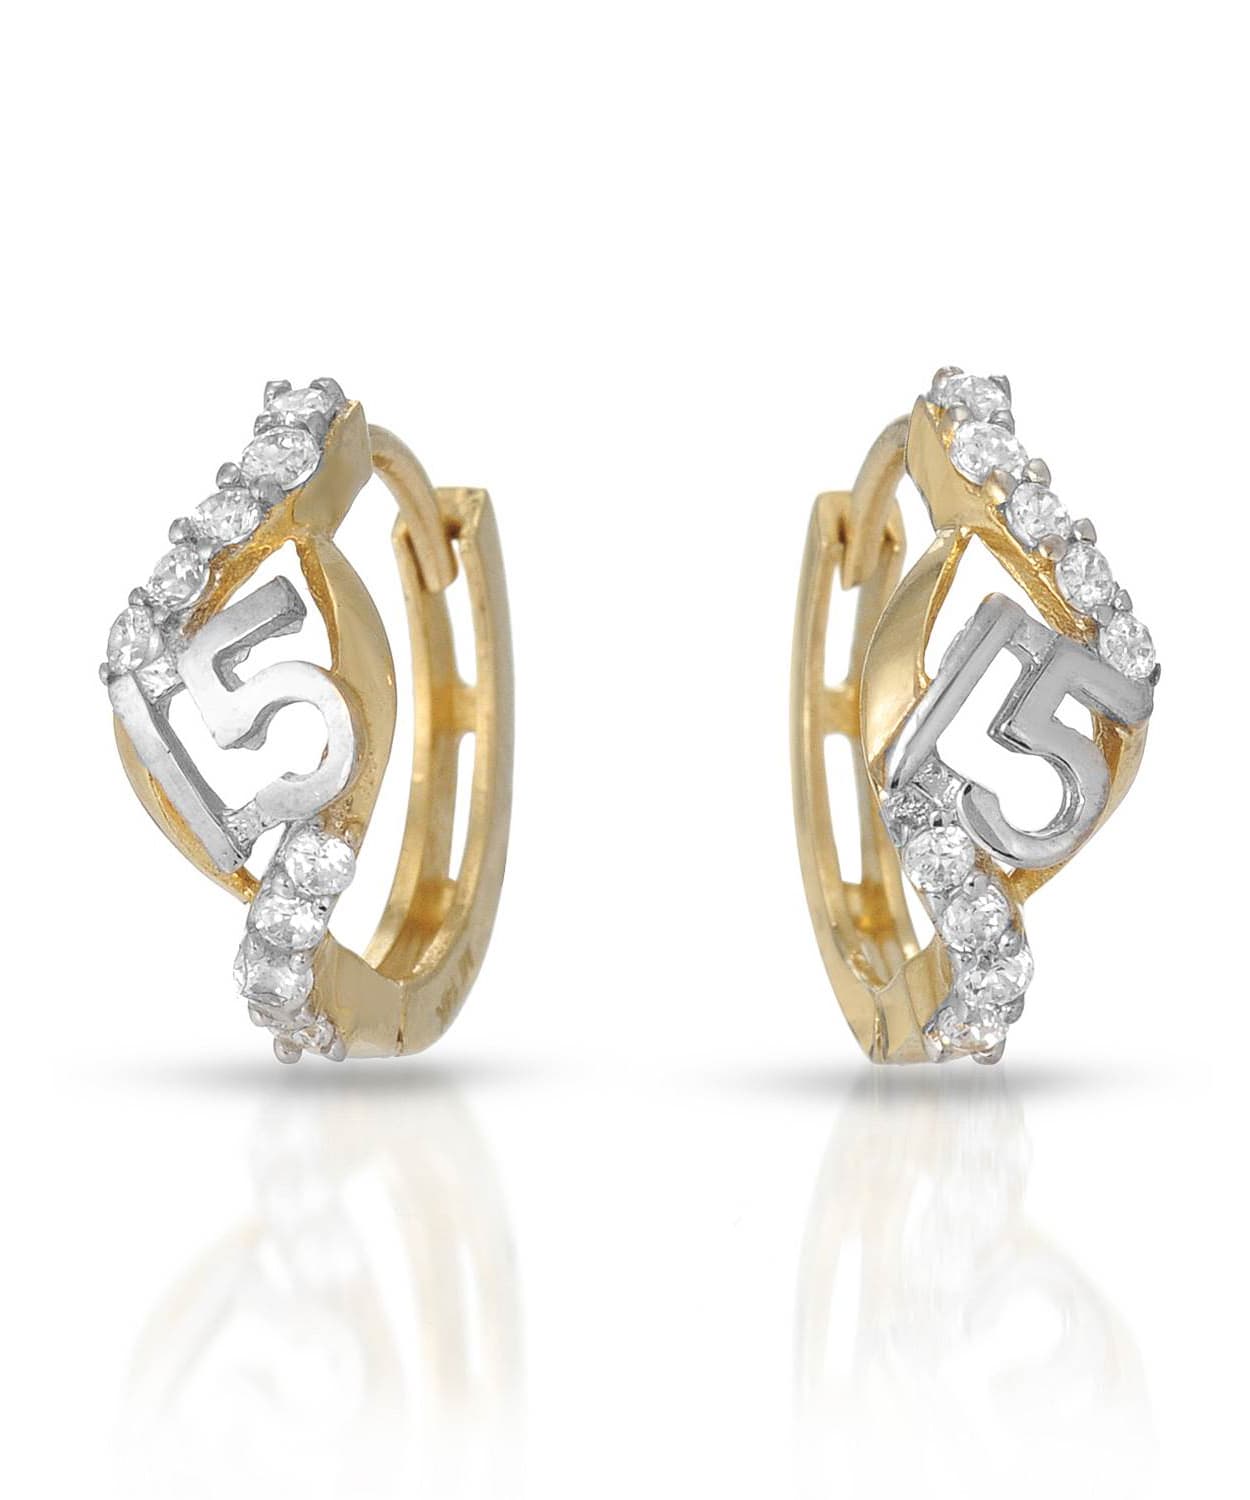 "Sweet 15" Collection Brilliant Cut Cubic Zirconia 14k Yellow Gold Earrings View 1